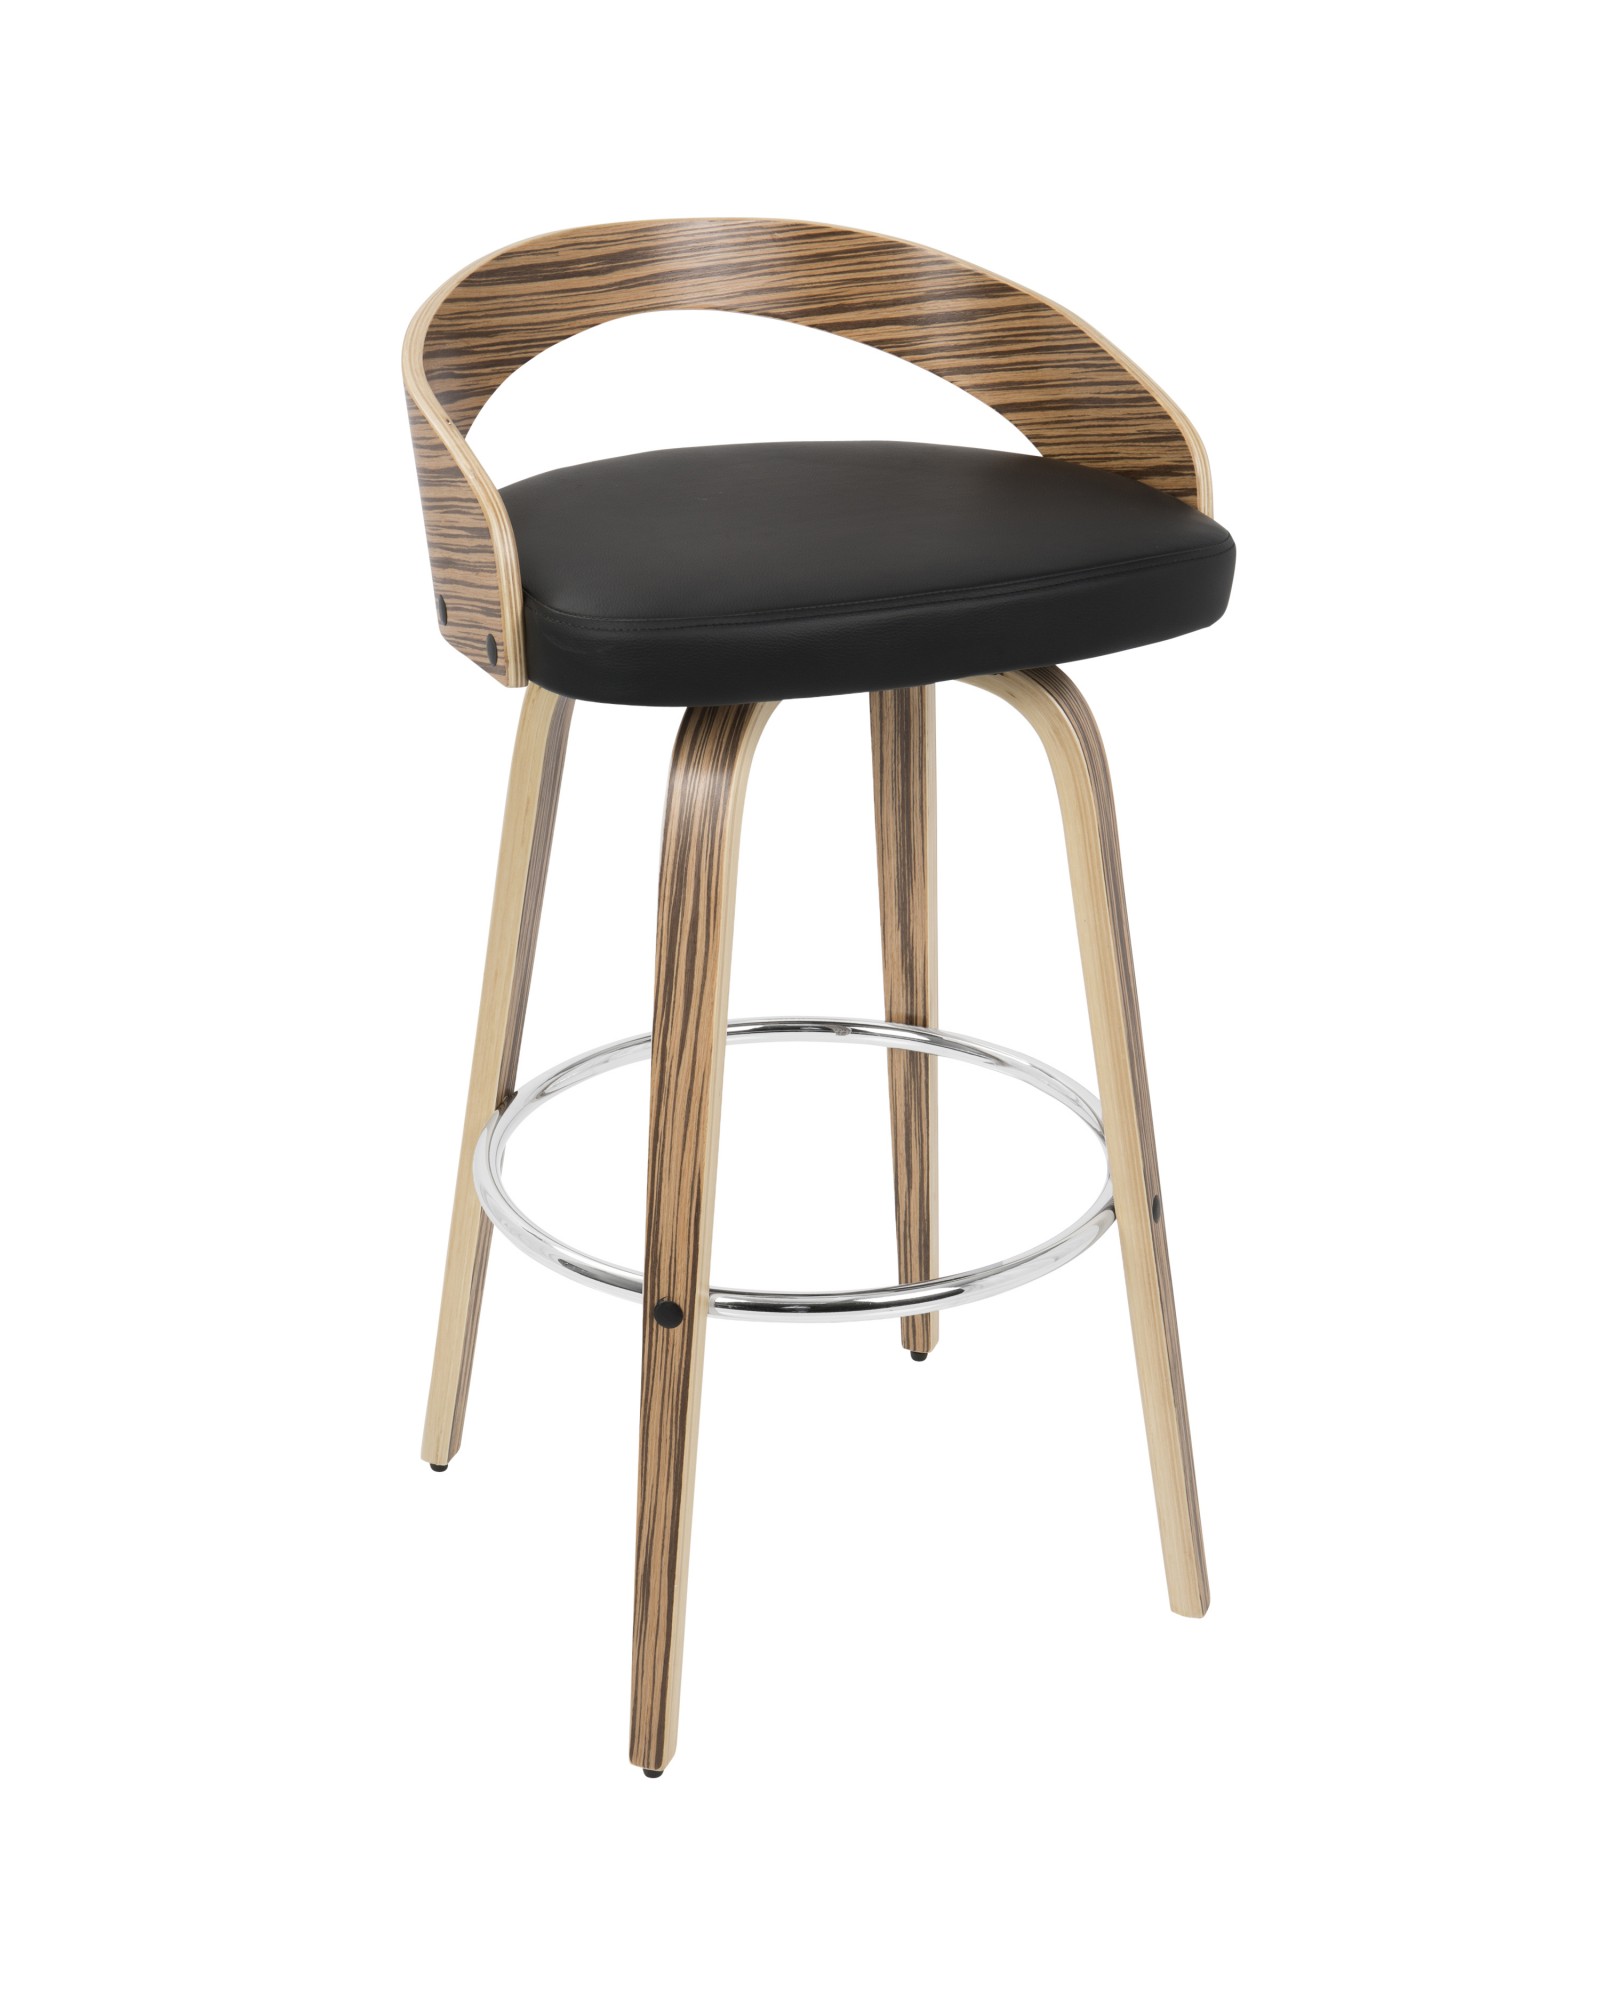 Grotto Mid-Century Modern Barstool with Swivel in Zebra Wood with Black Faux Leather